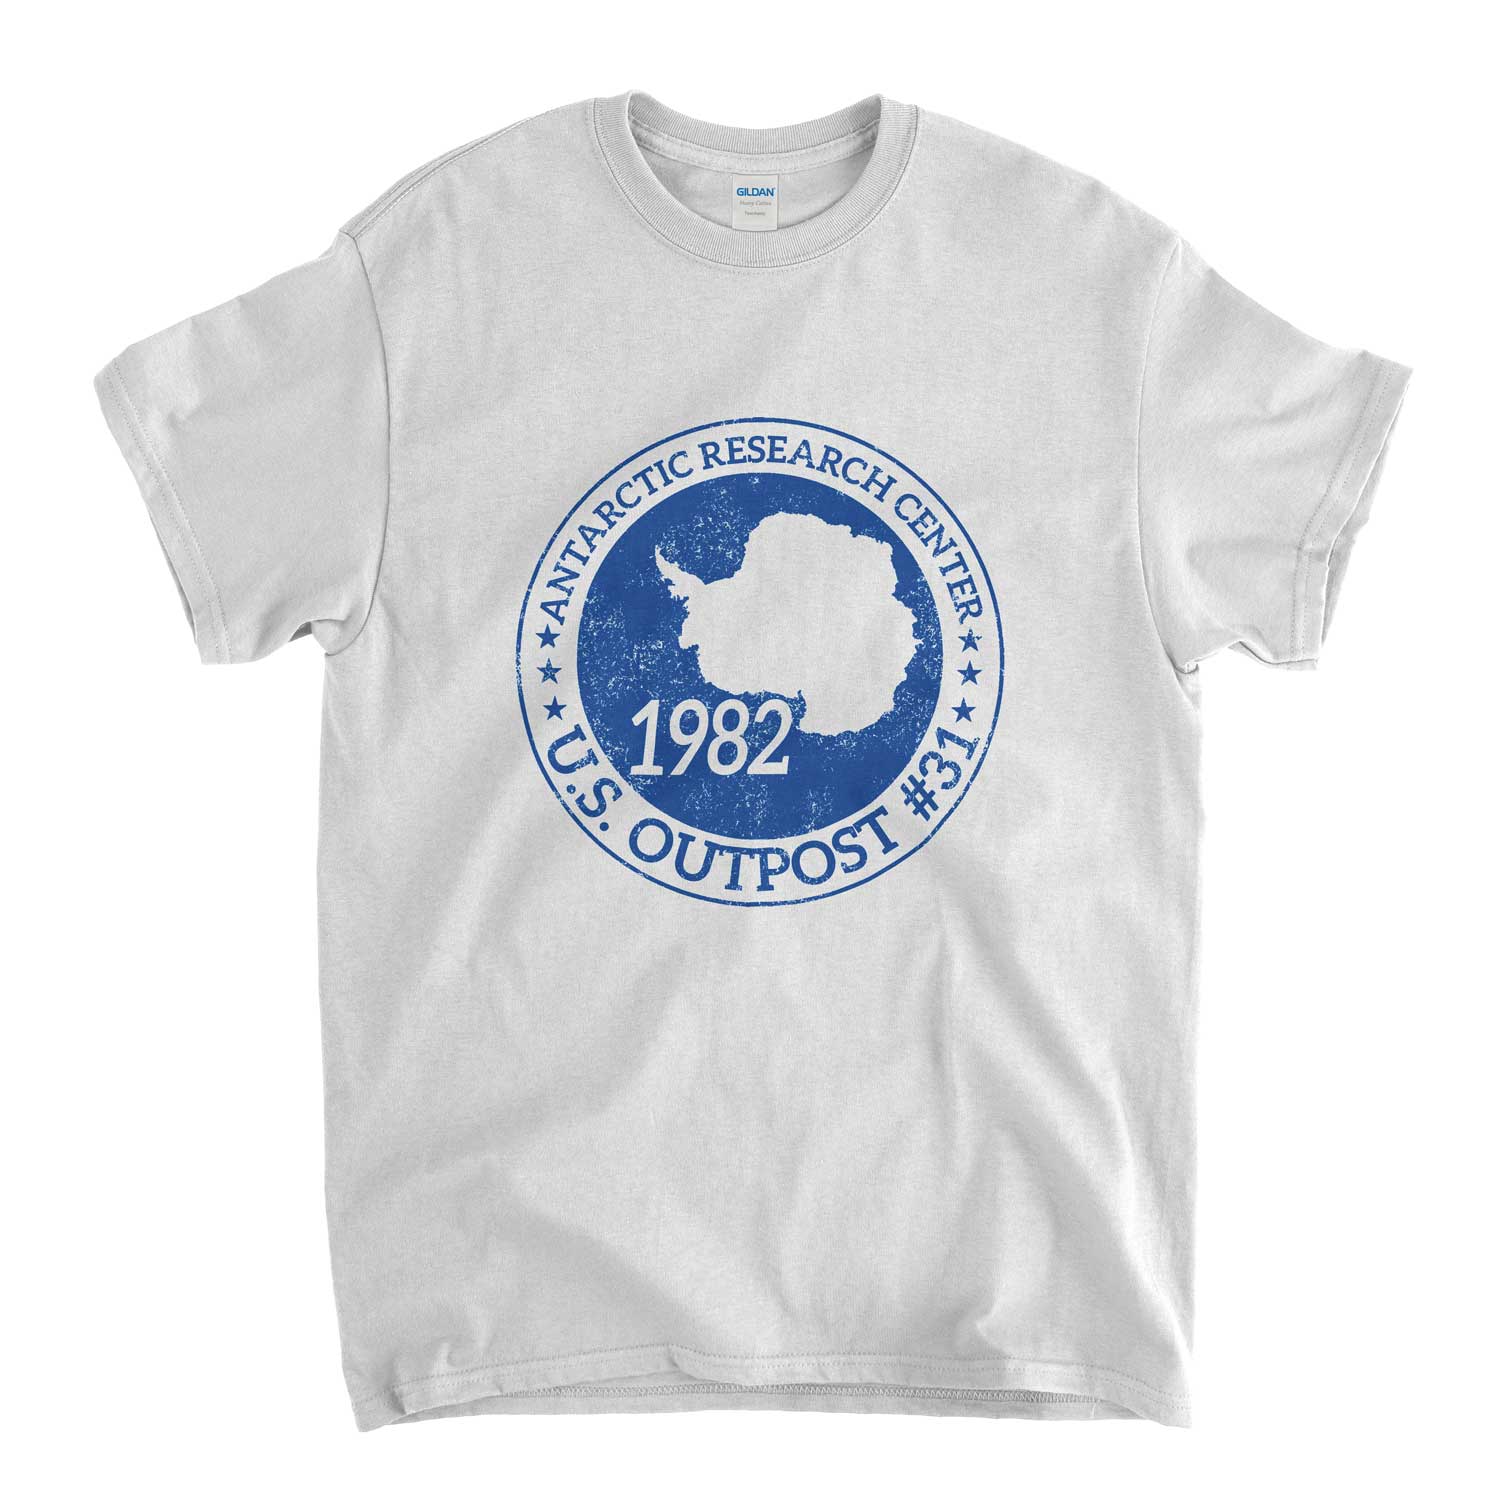 Inspired by The Thing T Shirt - US Outpost #31 Antarctica Research Station 1982